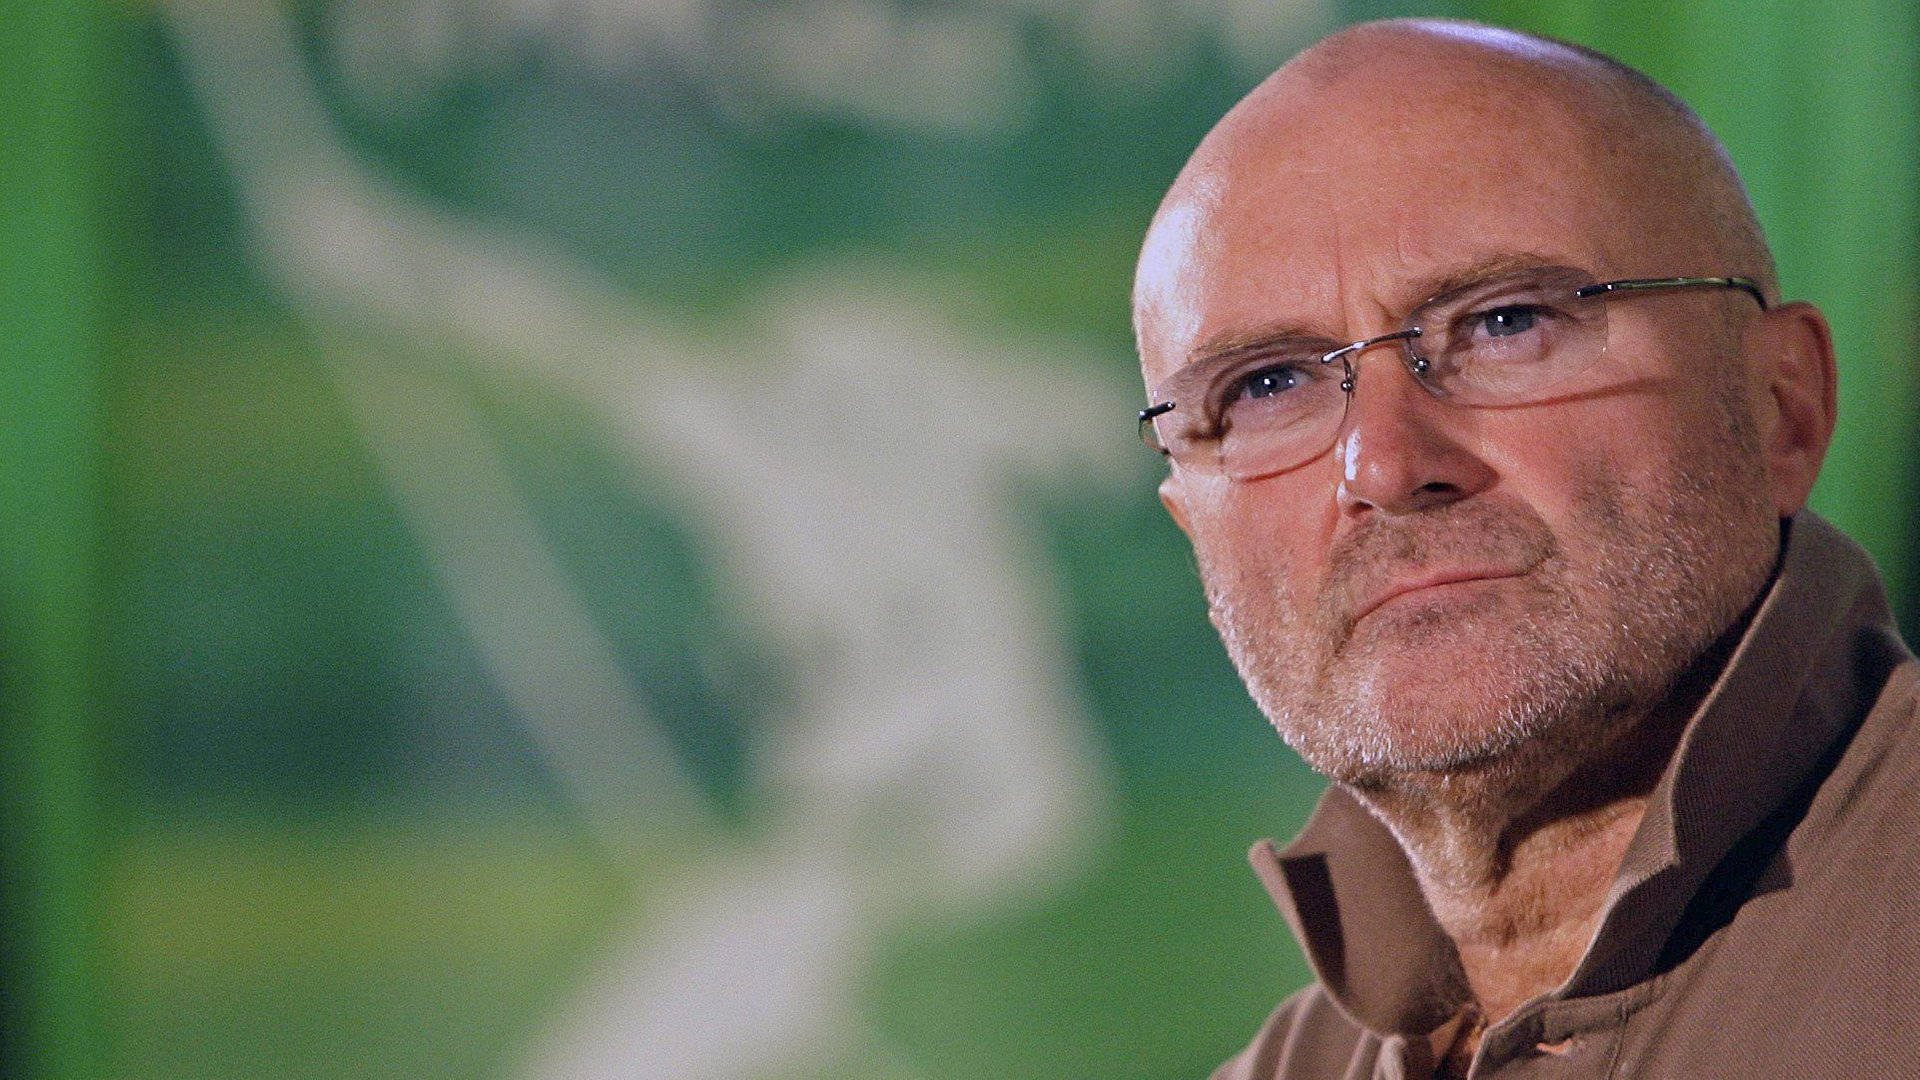 Phil Collins Serious Looks Wallpaper